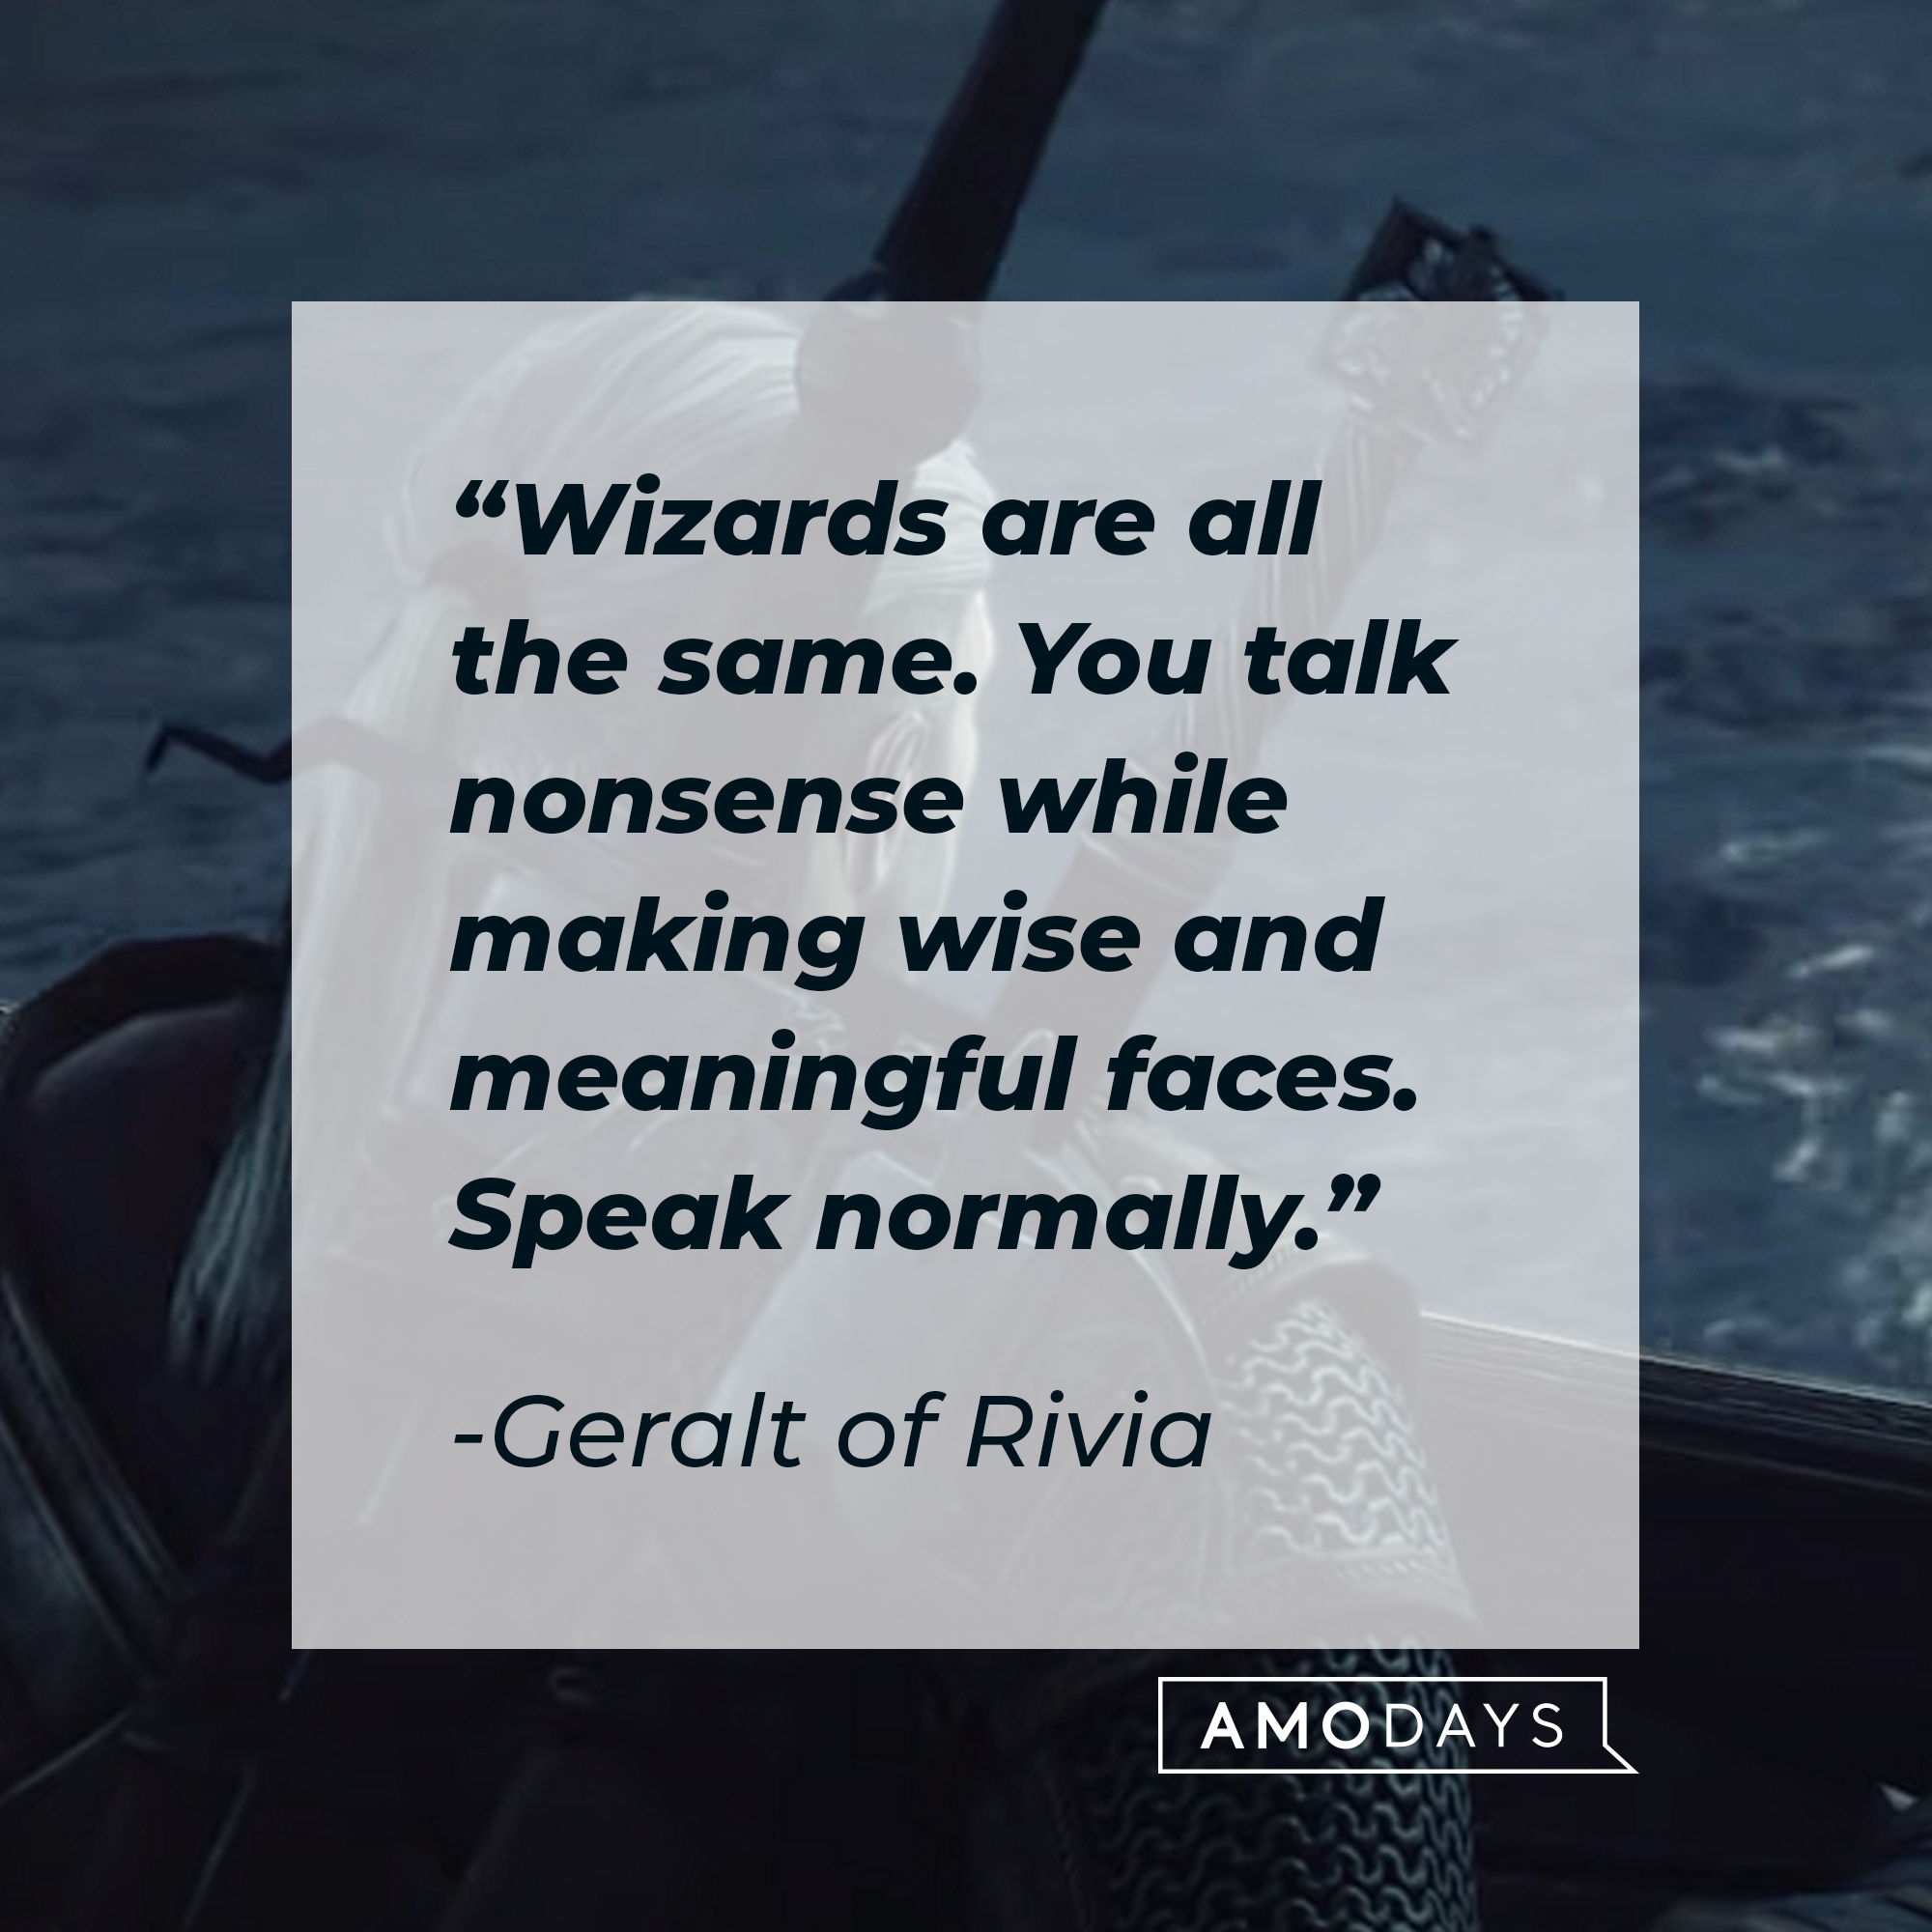 Geralt of Rivia from the video game with his quote: “Wizards are all the same. You talk nonsense while making wise and meaningful faces. Speak normally.” | Source: youtube.com/thewitcher